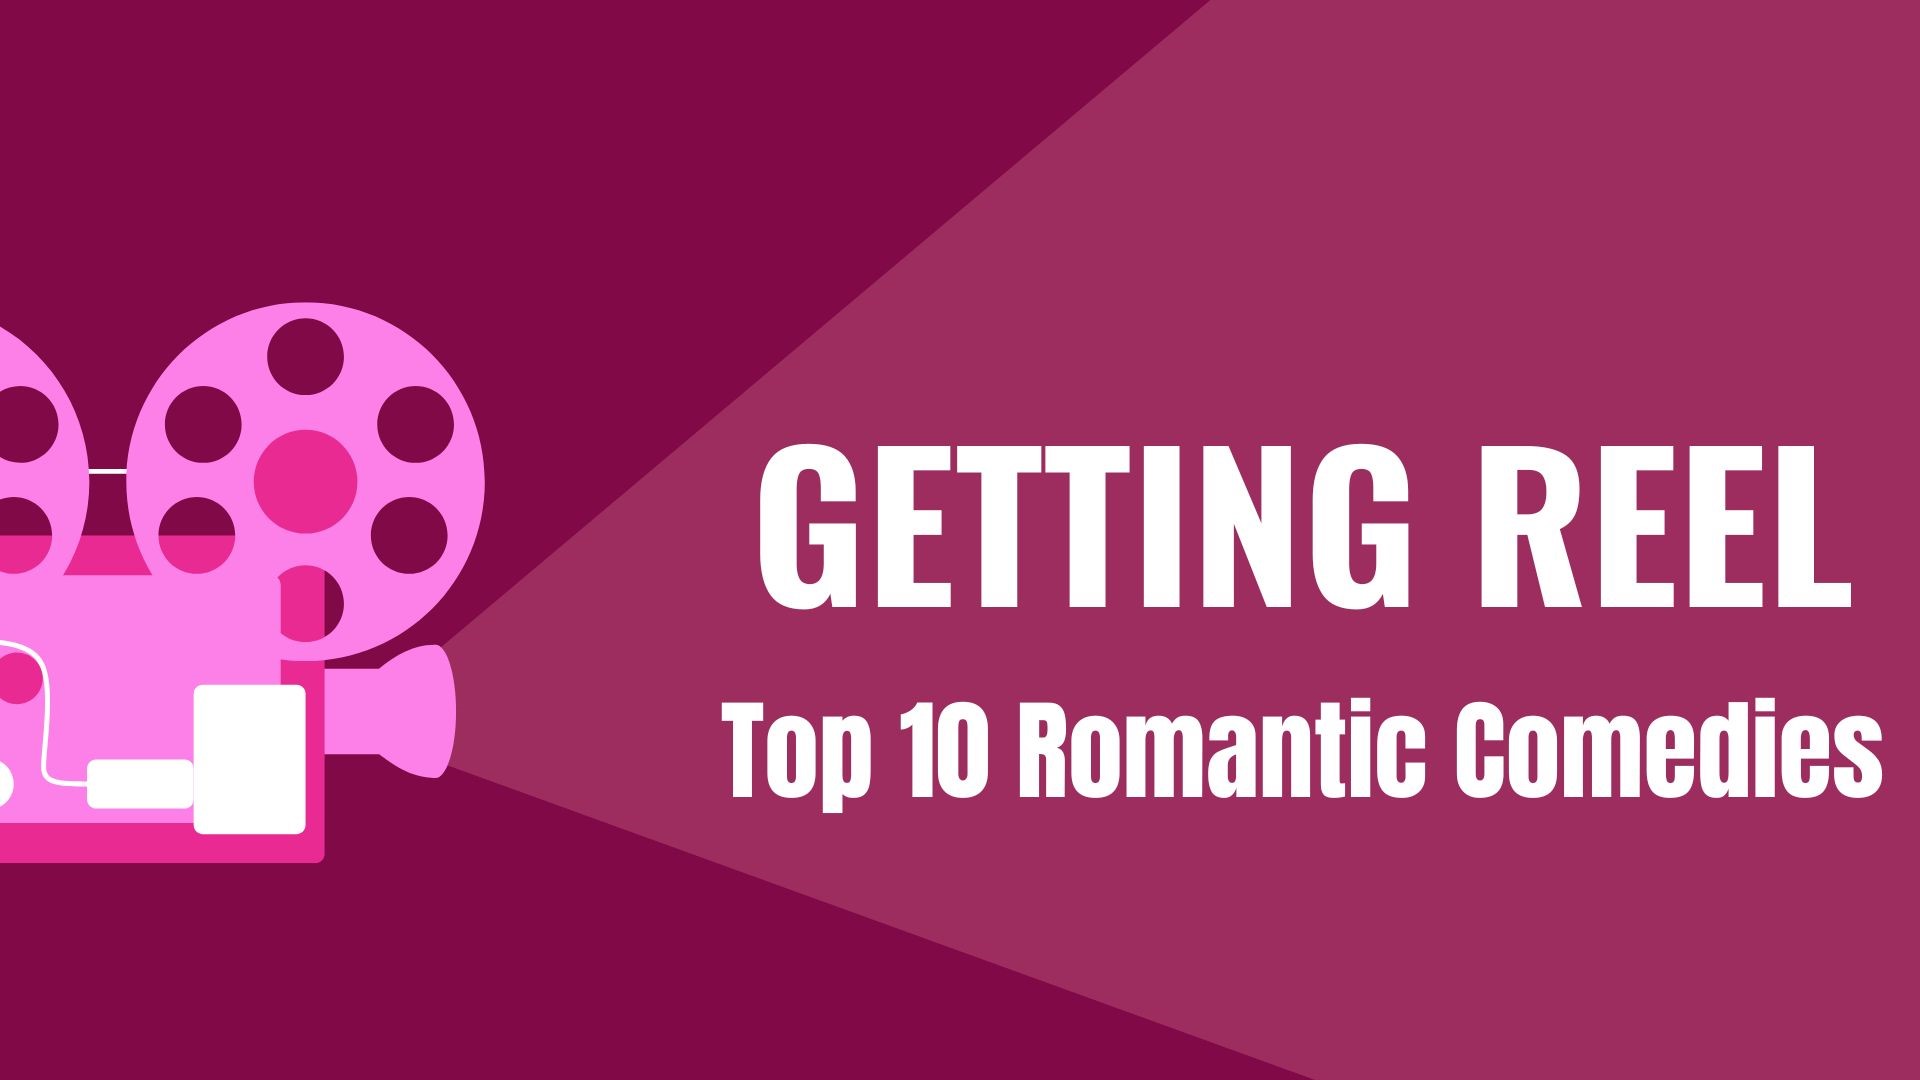 KTHV movie reviewers look at the top 10 rom coms of all time. Hear their favorite picks and honorable mentions.